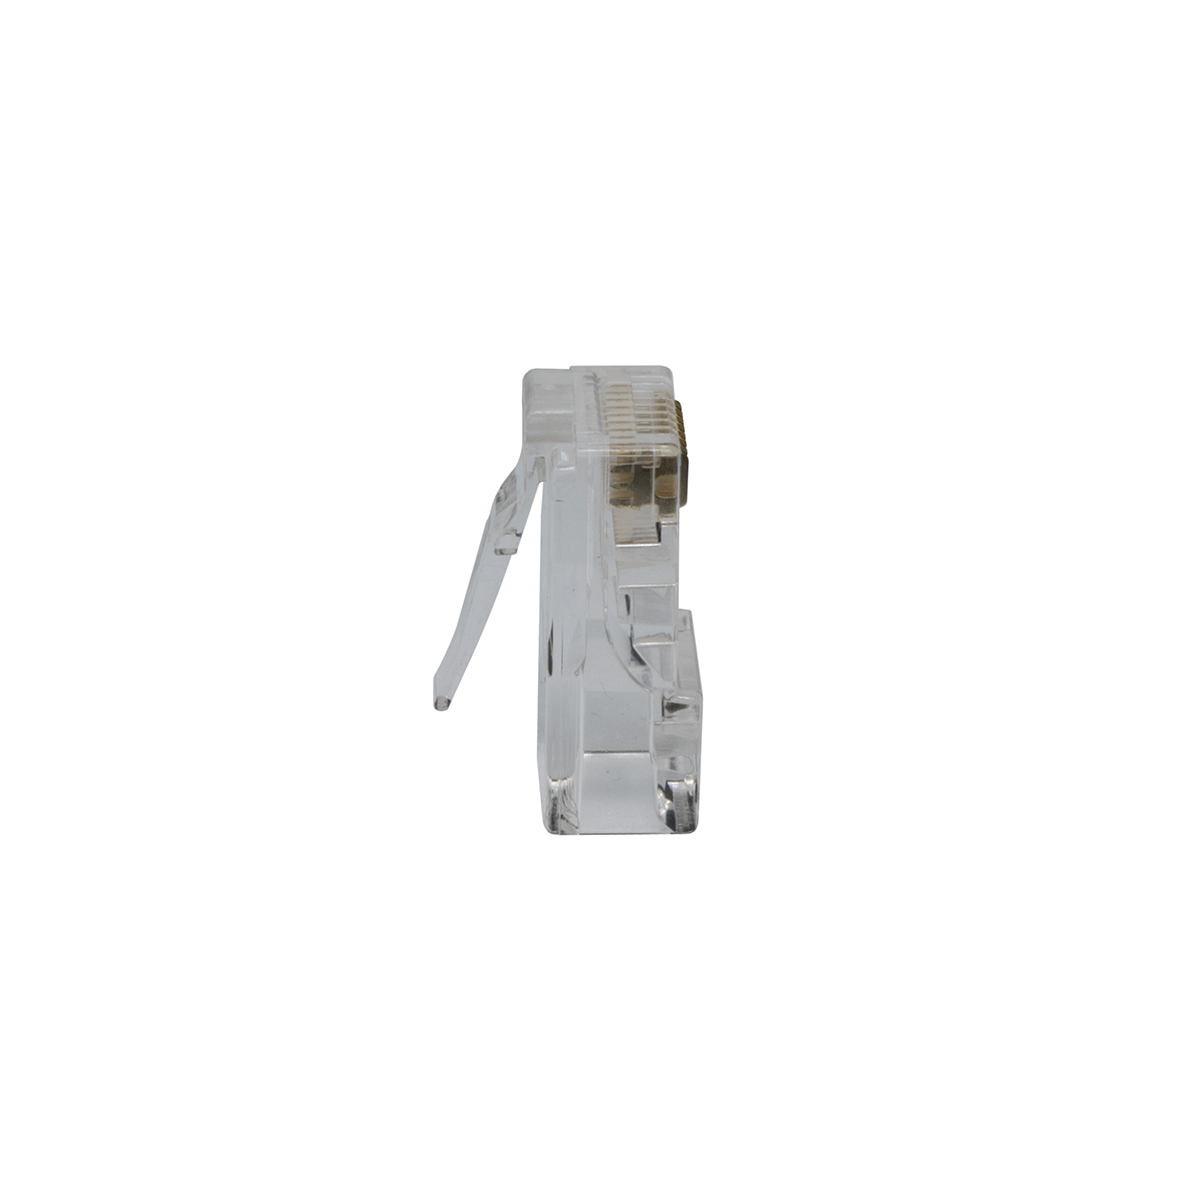 CAT5 Solid Wire 8P8C (RJ45) Mod Plugs (Side View)